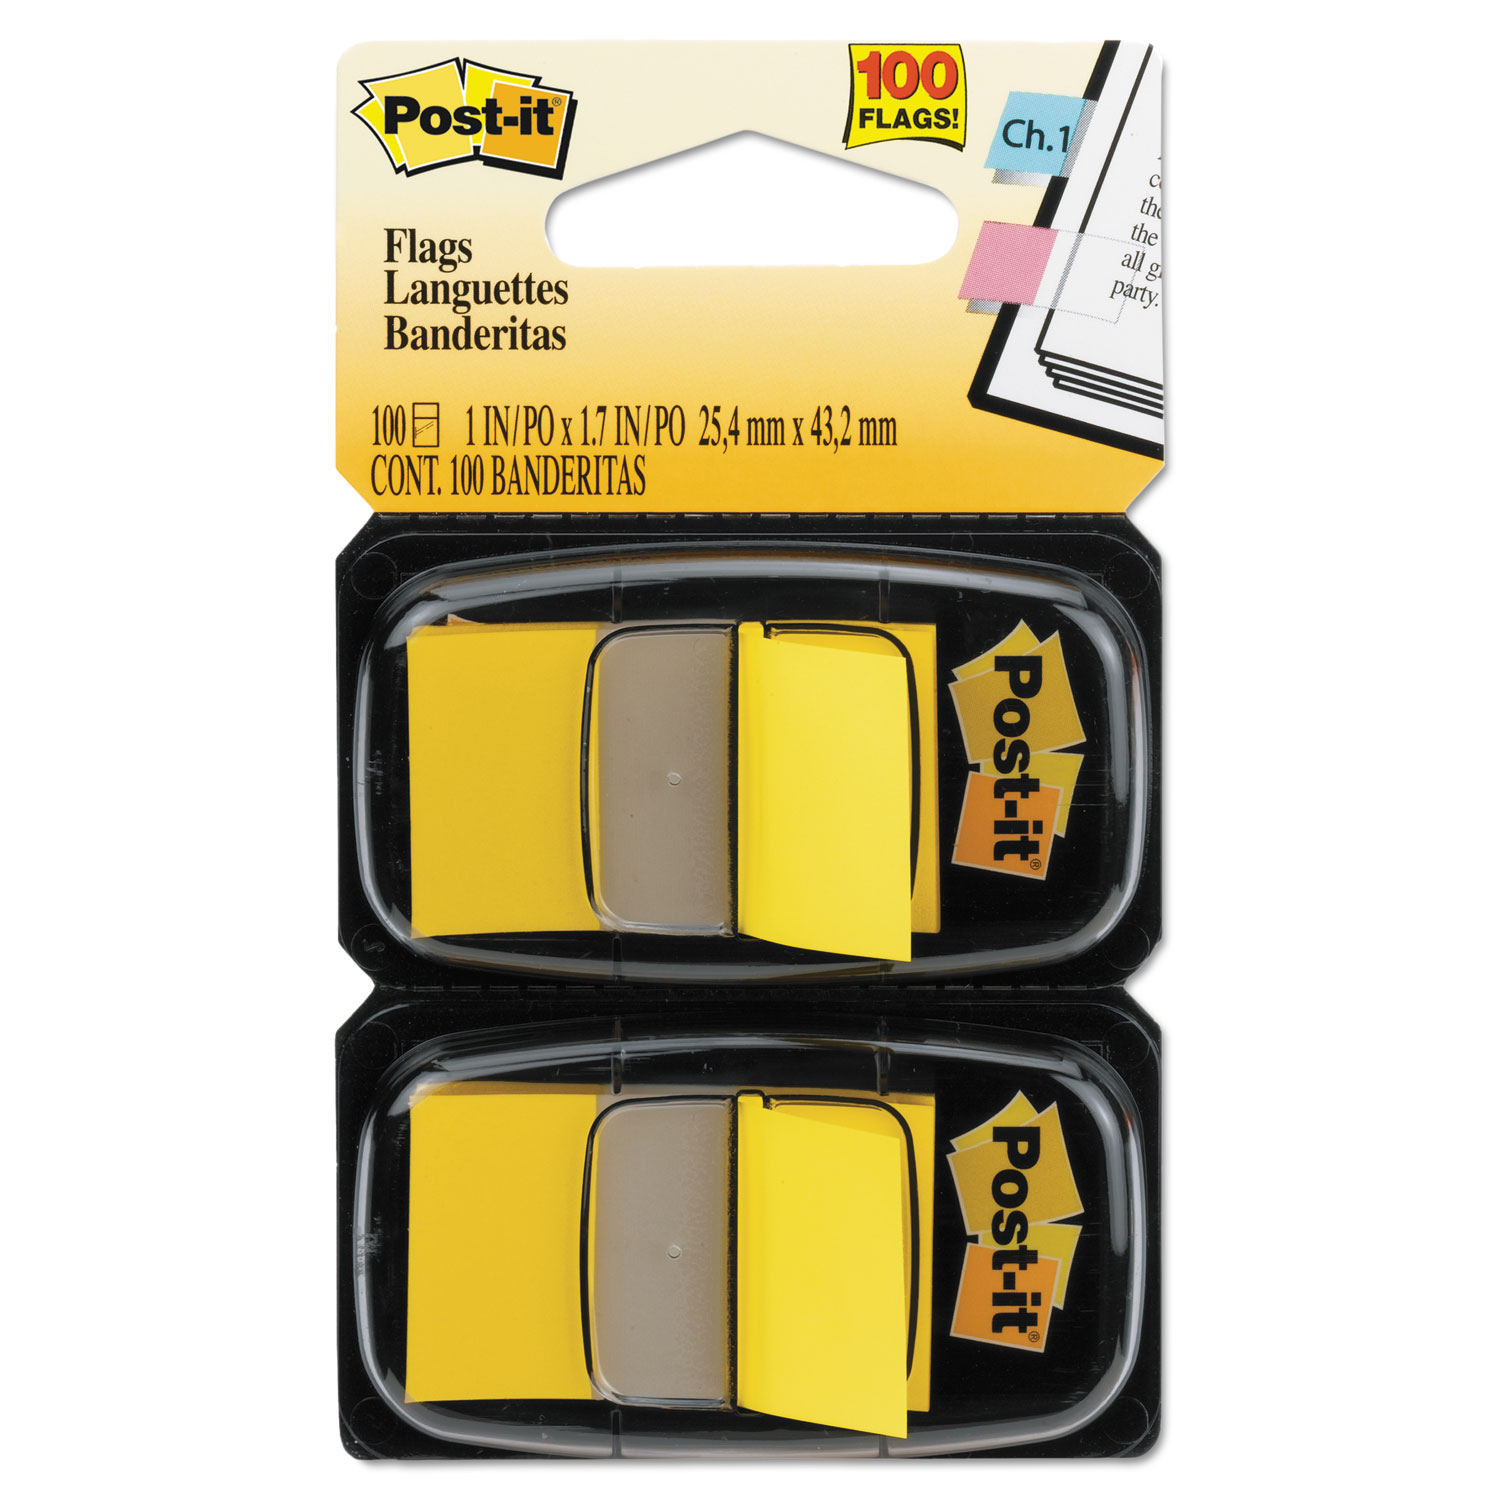  Post-it Flags 680-YW2 Standard Page Flags in Dispenser, Yellow, 100 Flags/Dispenser (MMM680YW2) 